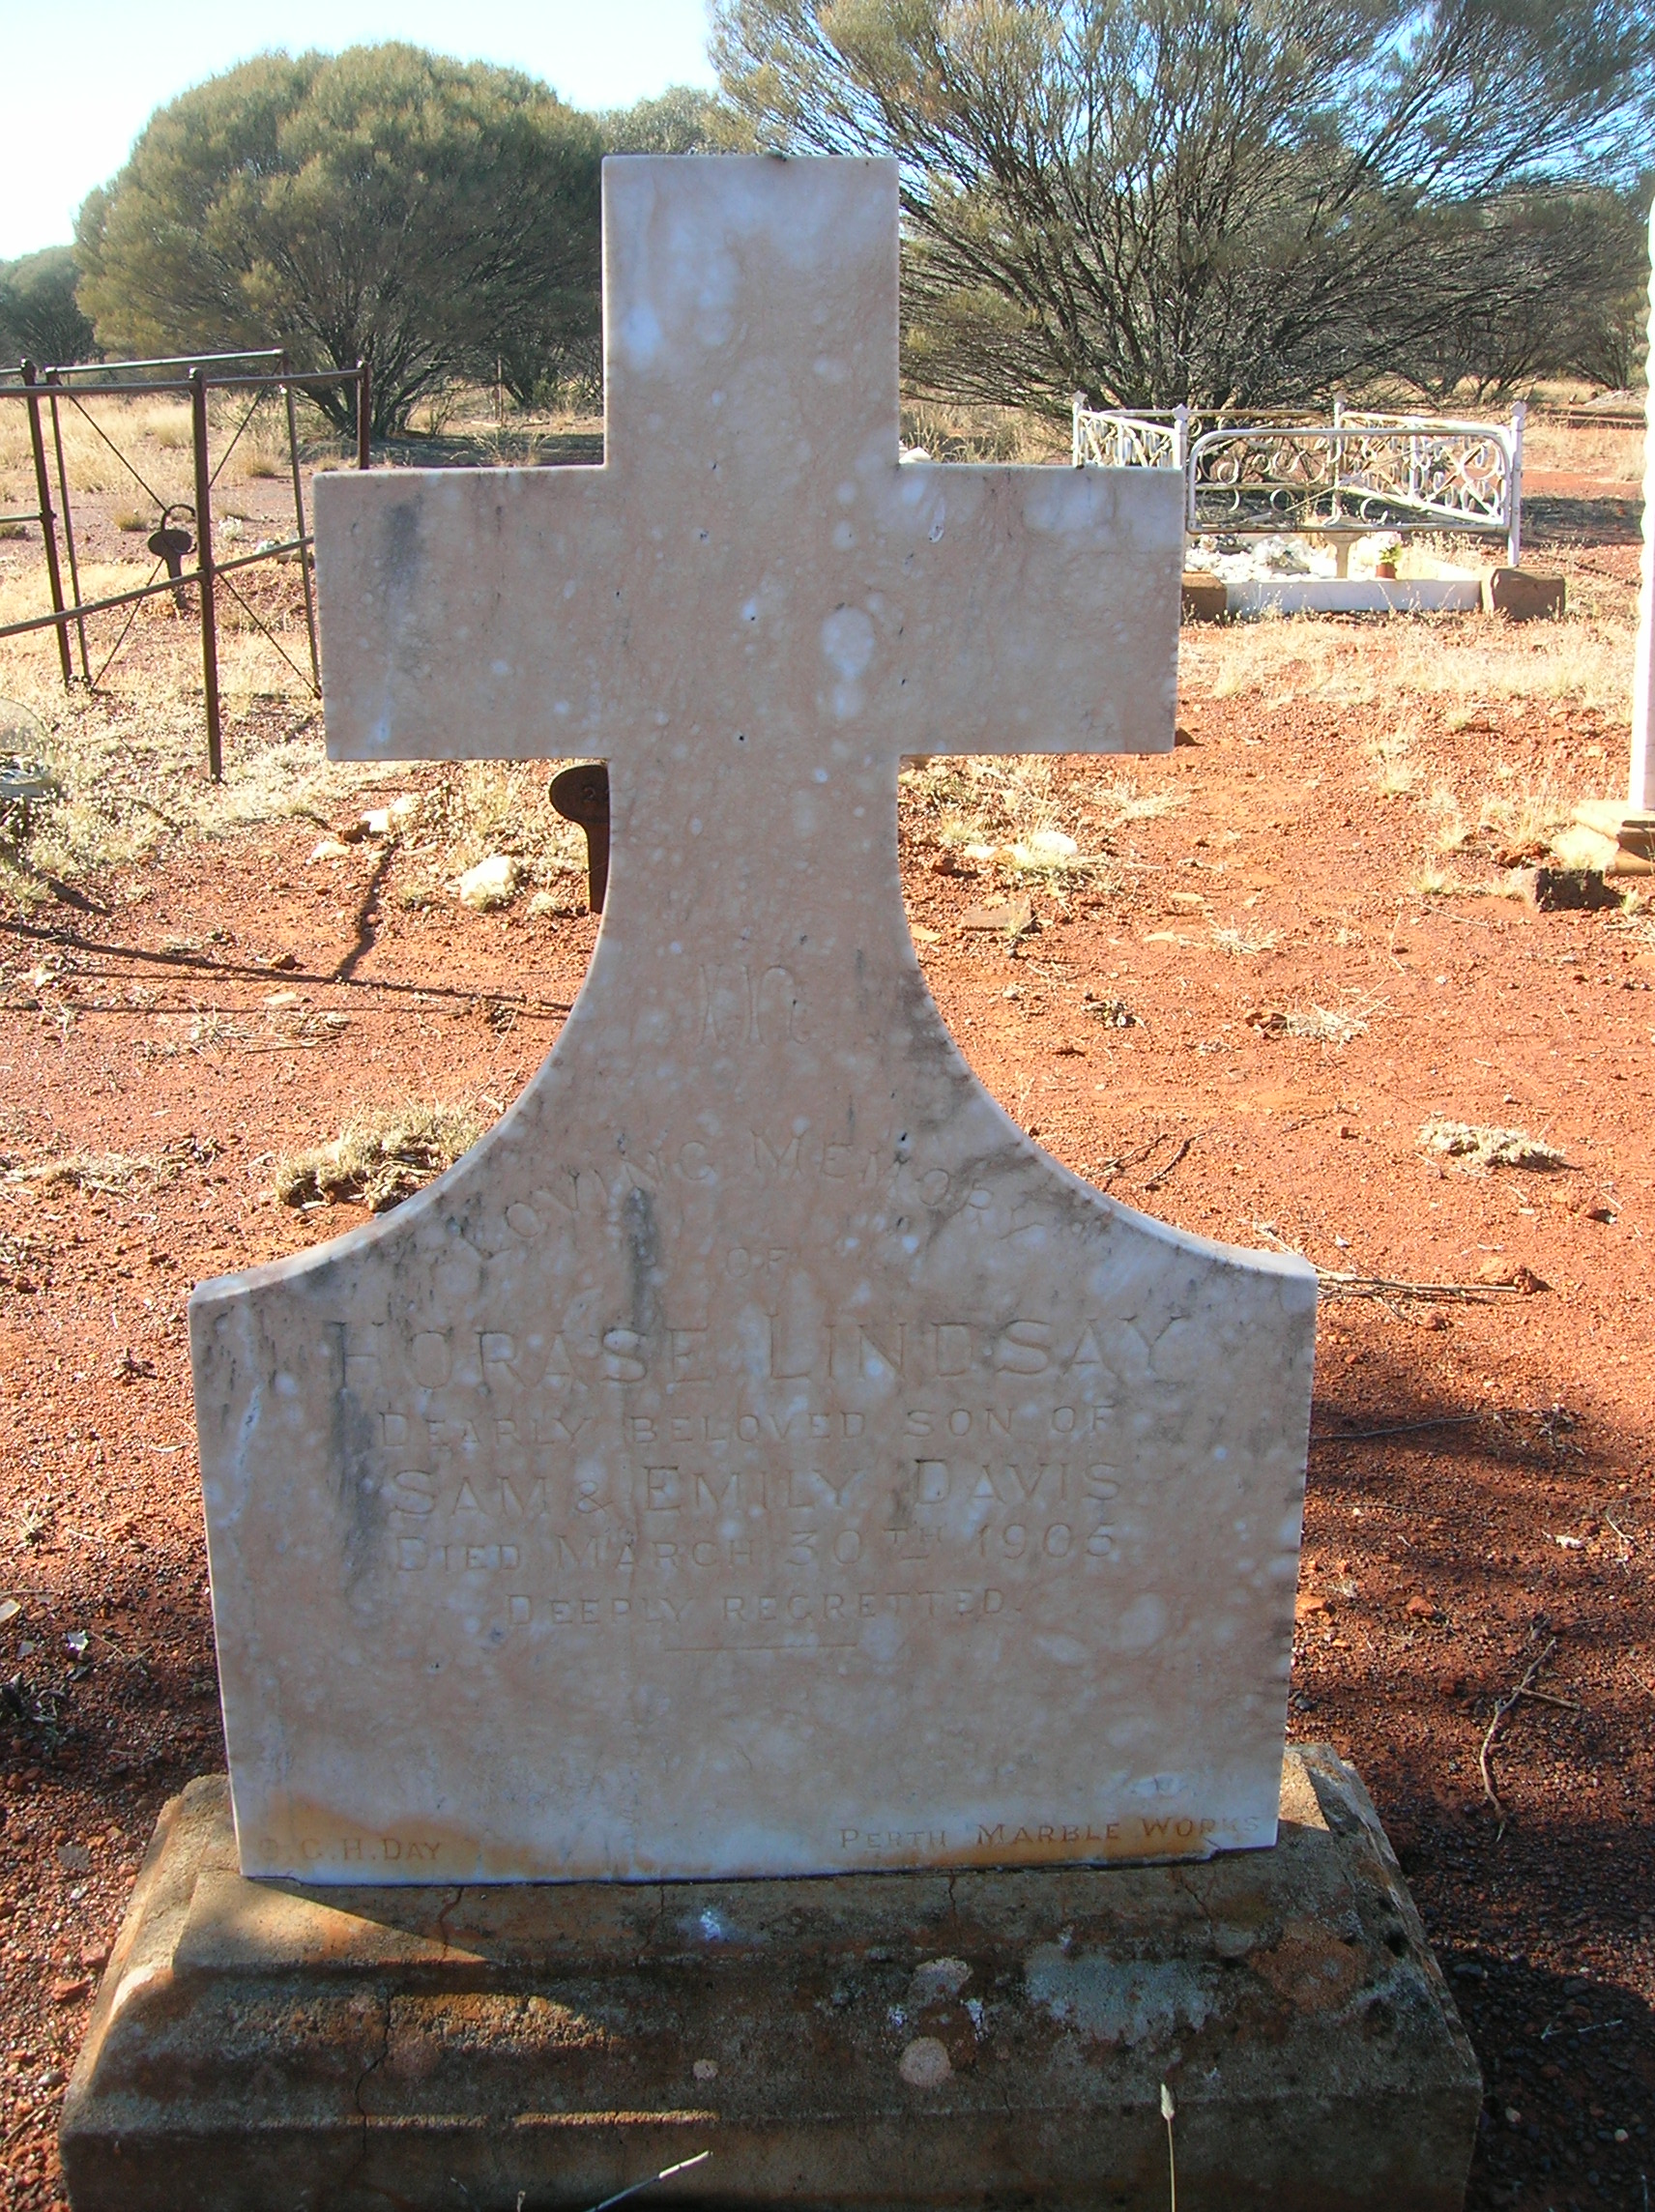 This is a photograph of the headstone of Horace Lindsay DAVIS